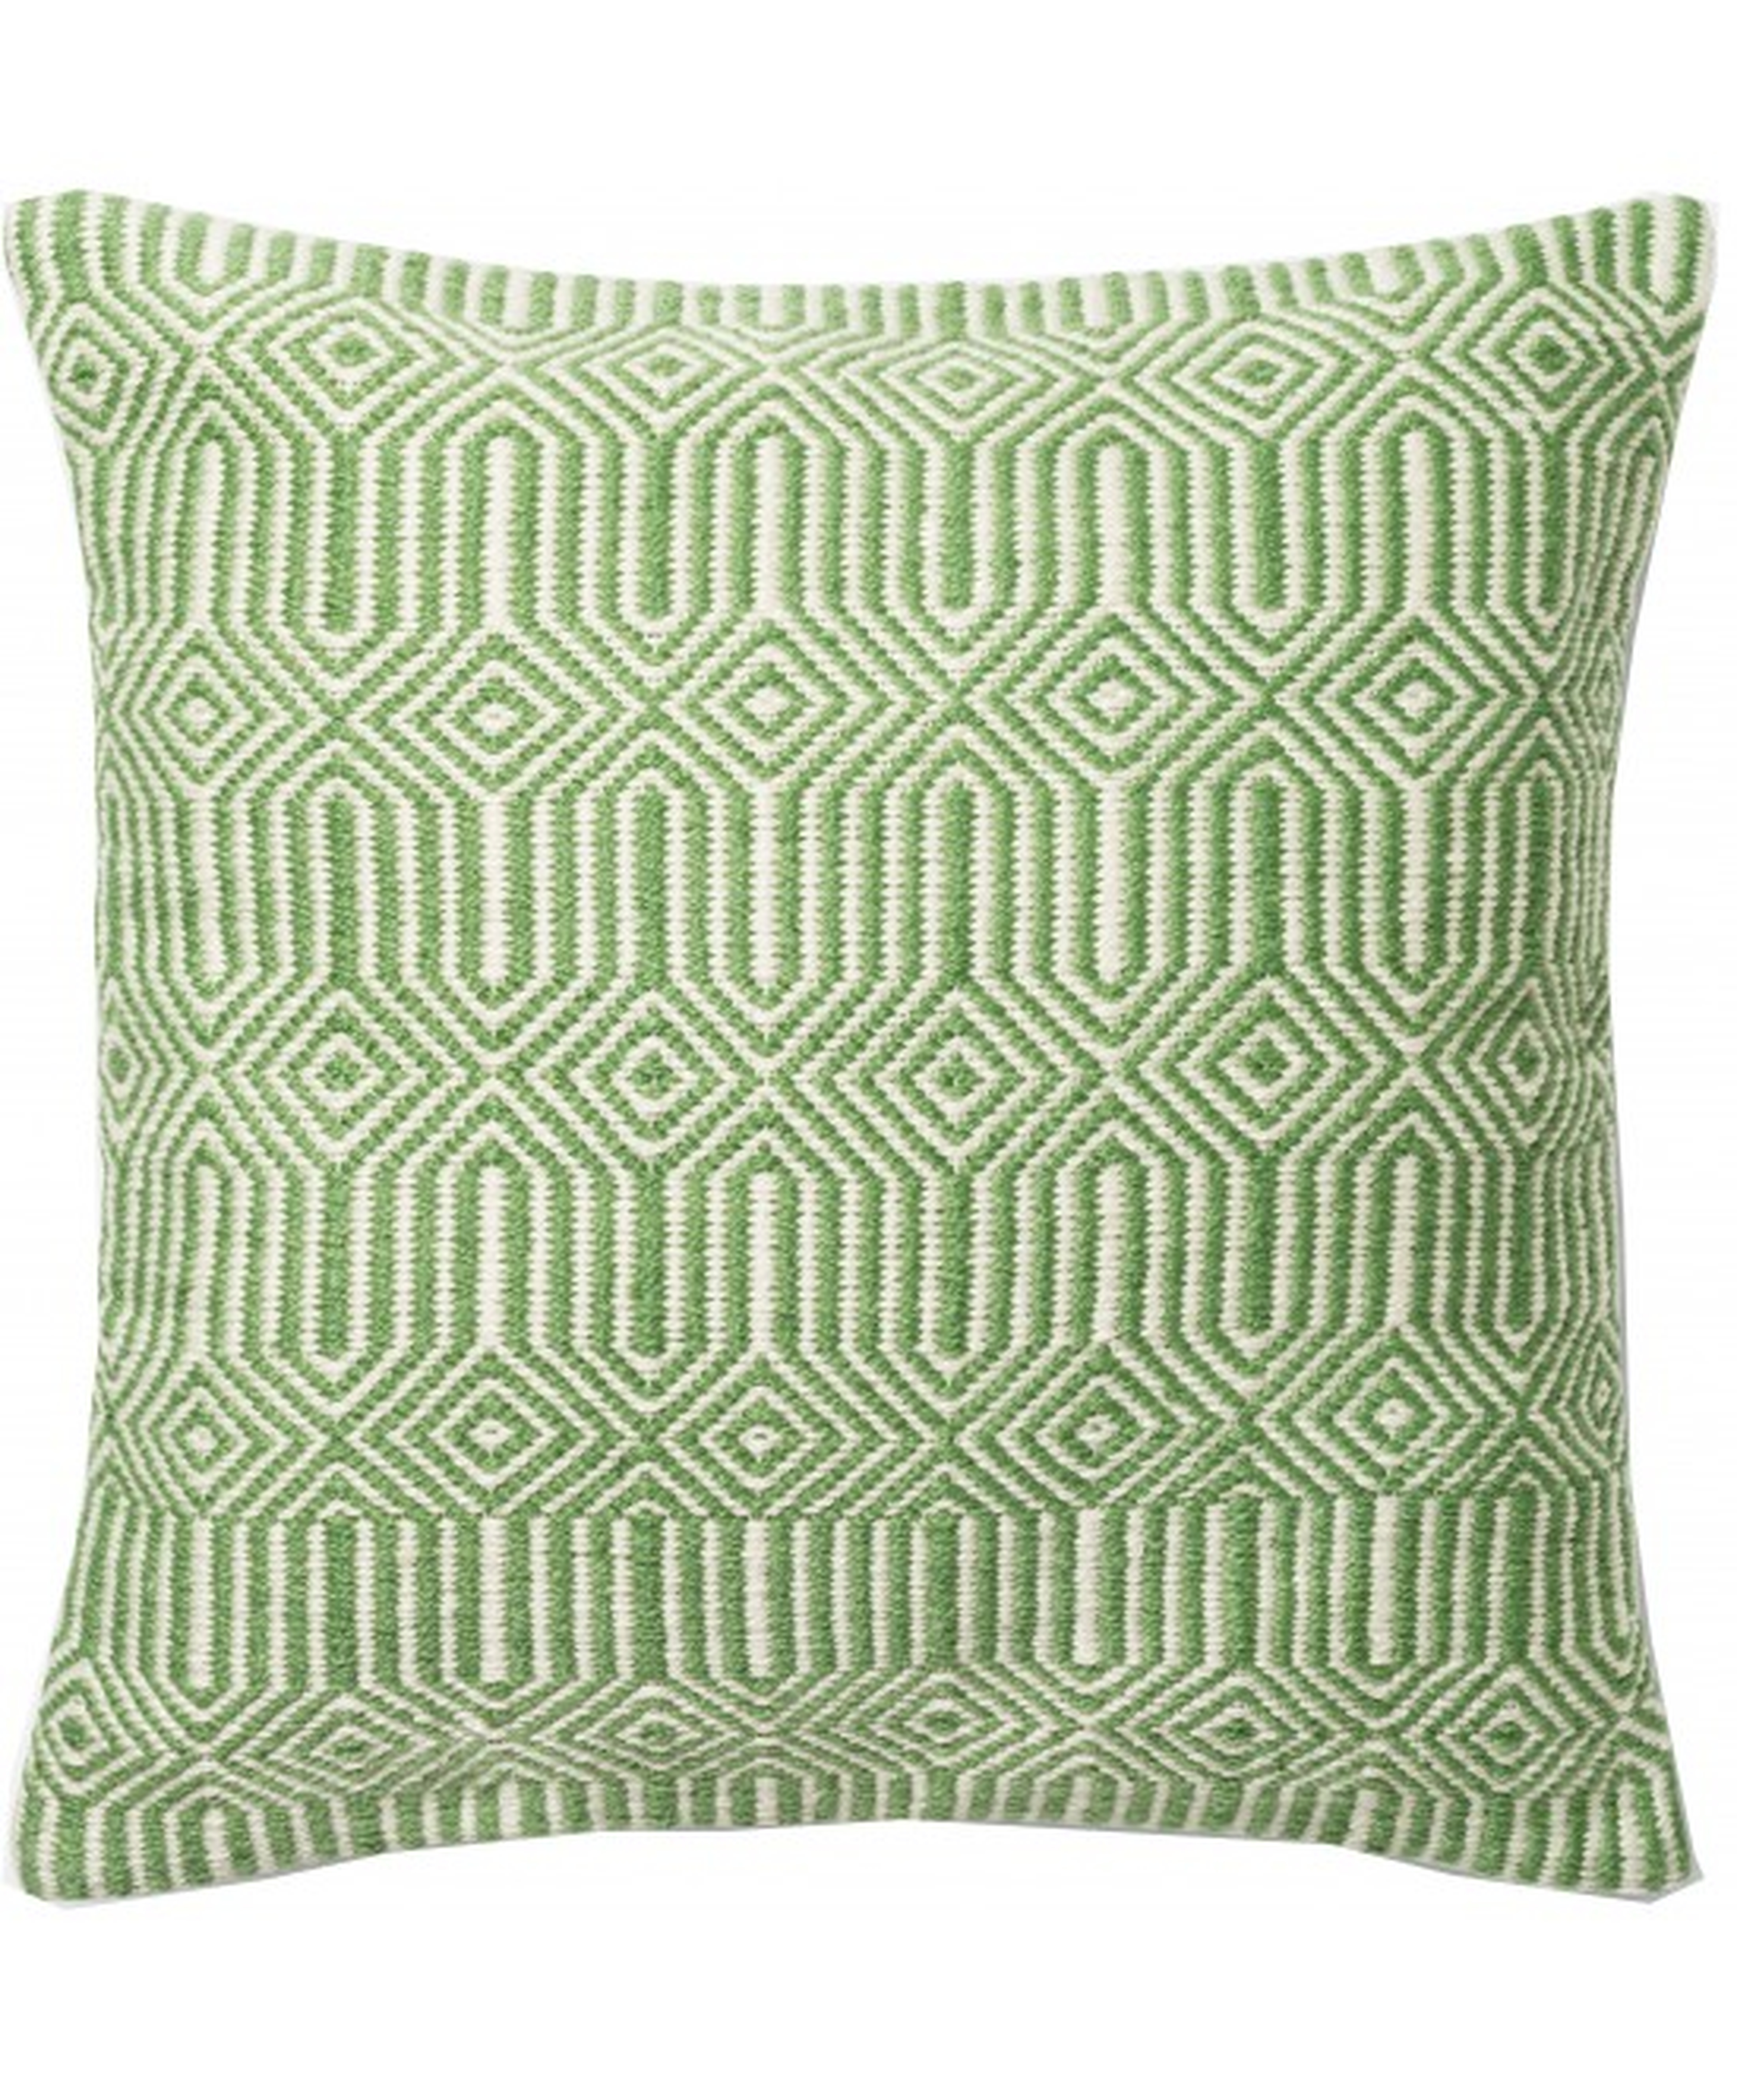 ANISSA INDOOR/OUTDOOR PILLOW, GREEN - 22" x 22" - polyester - Lulu and Georgia